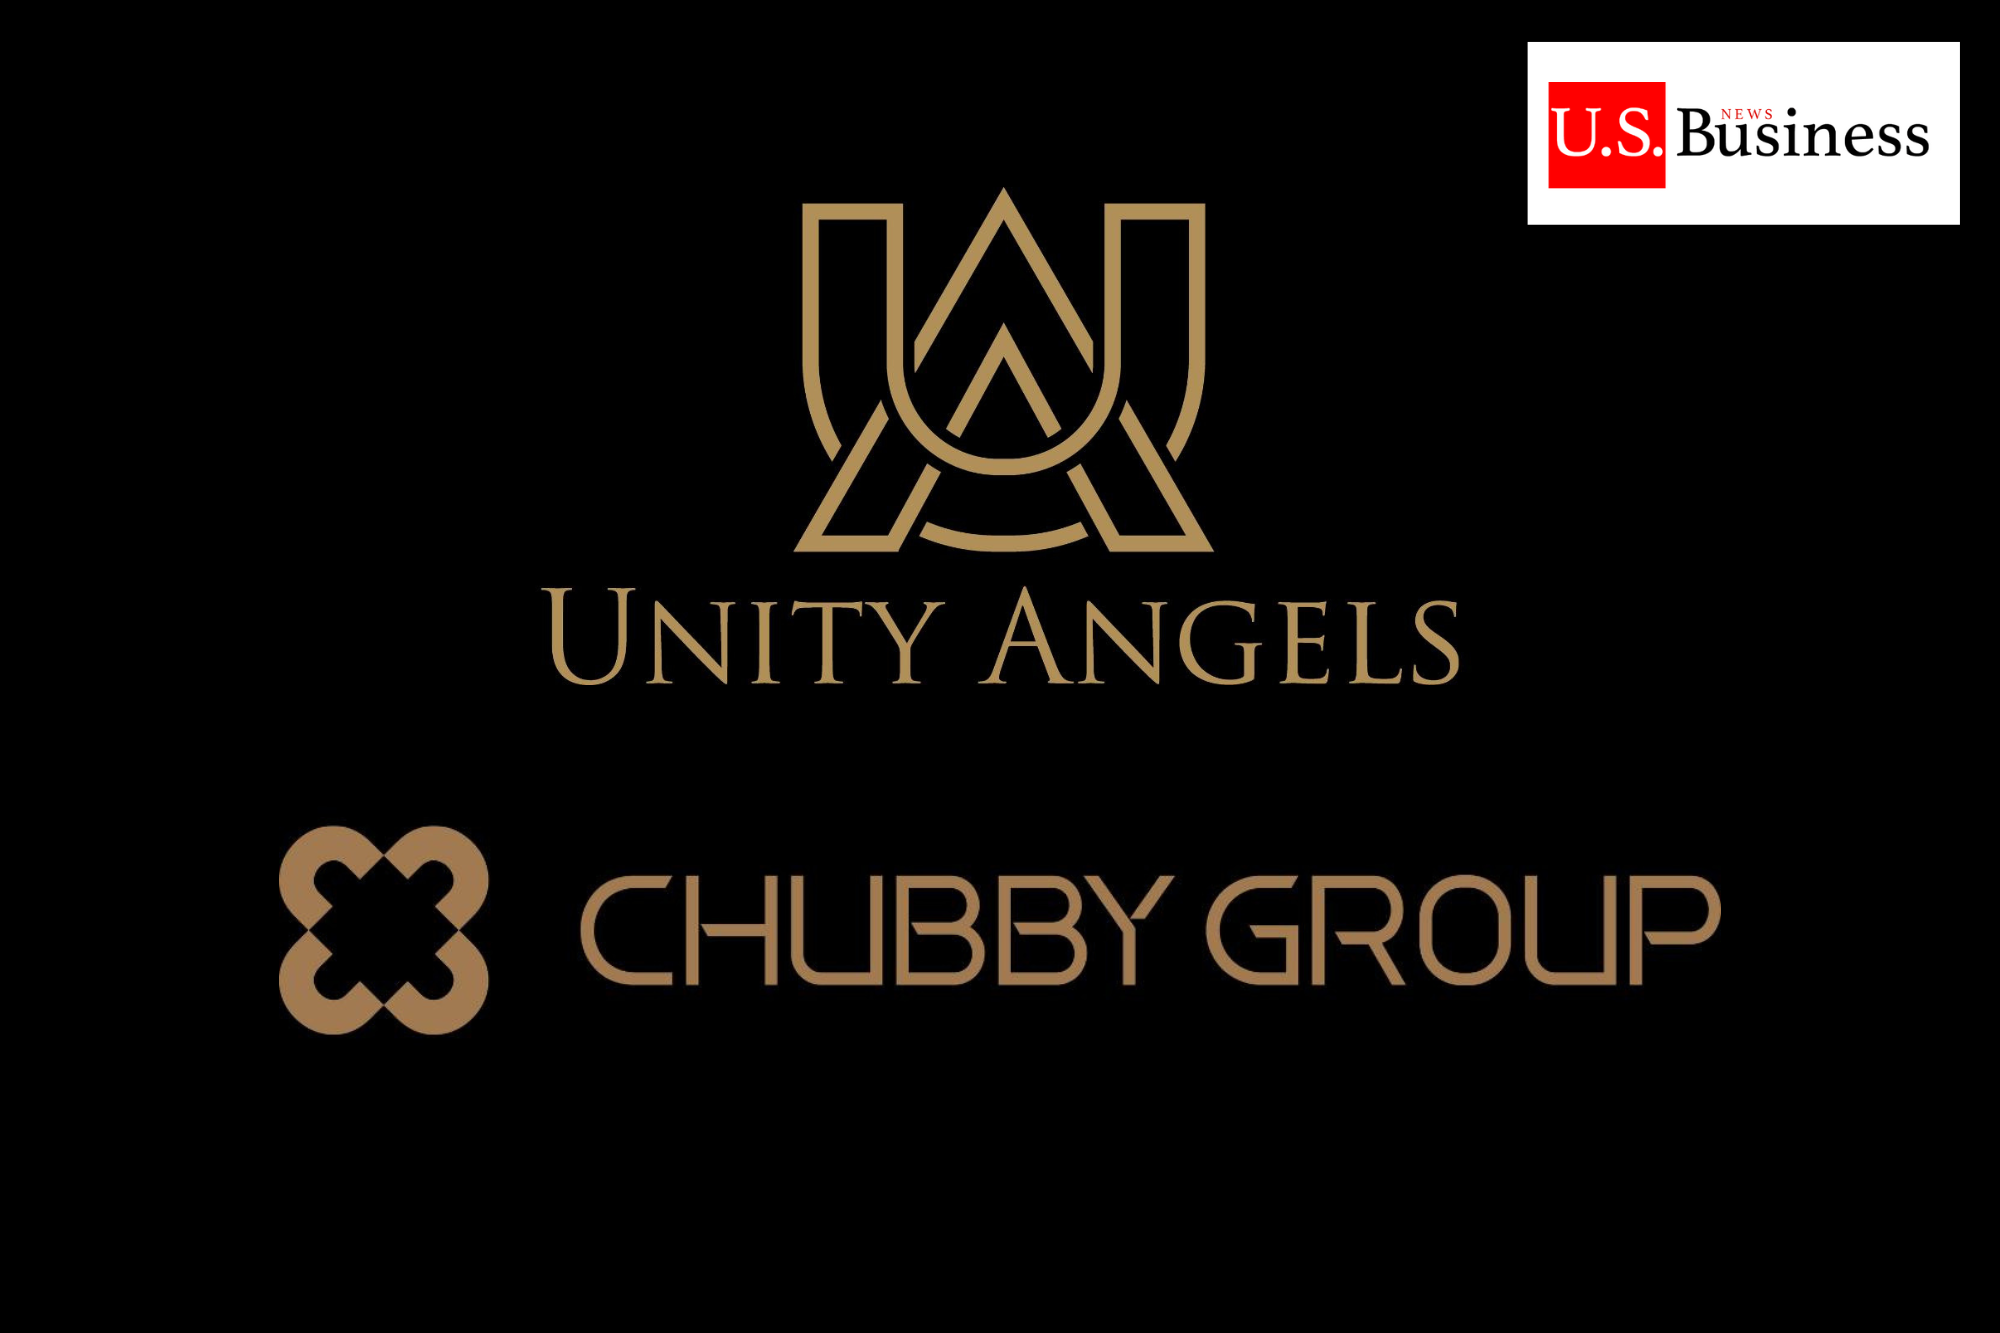 Chubby Group | Unity Angels Completes $2m+ Investment in Chubby Group